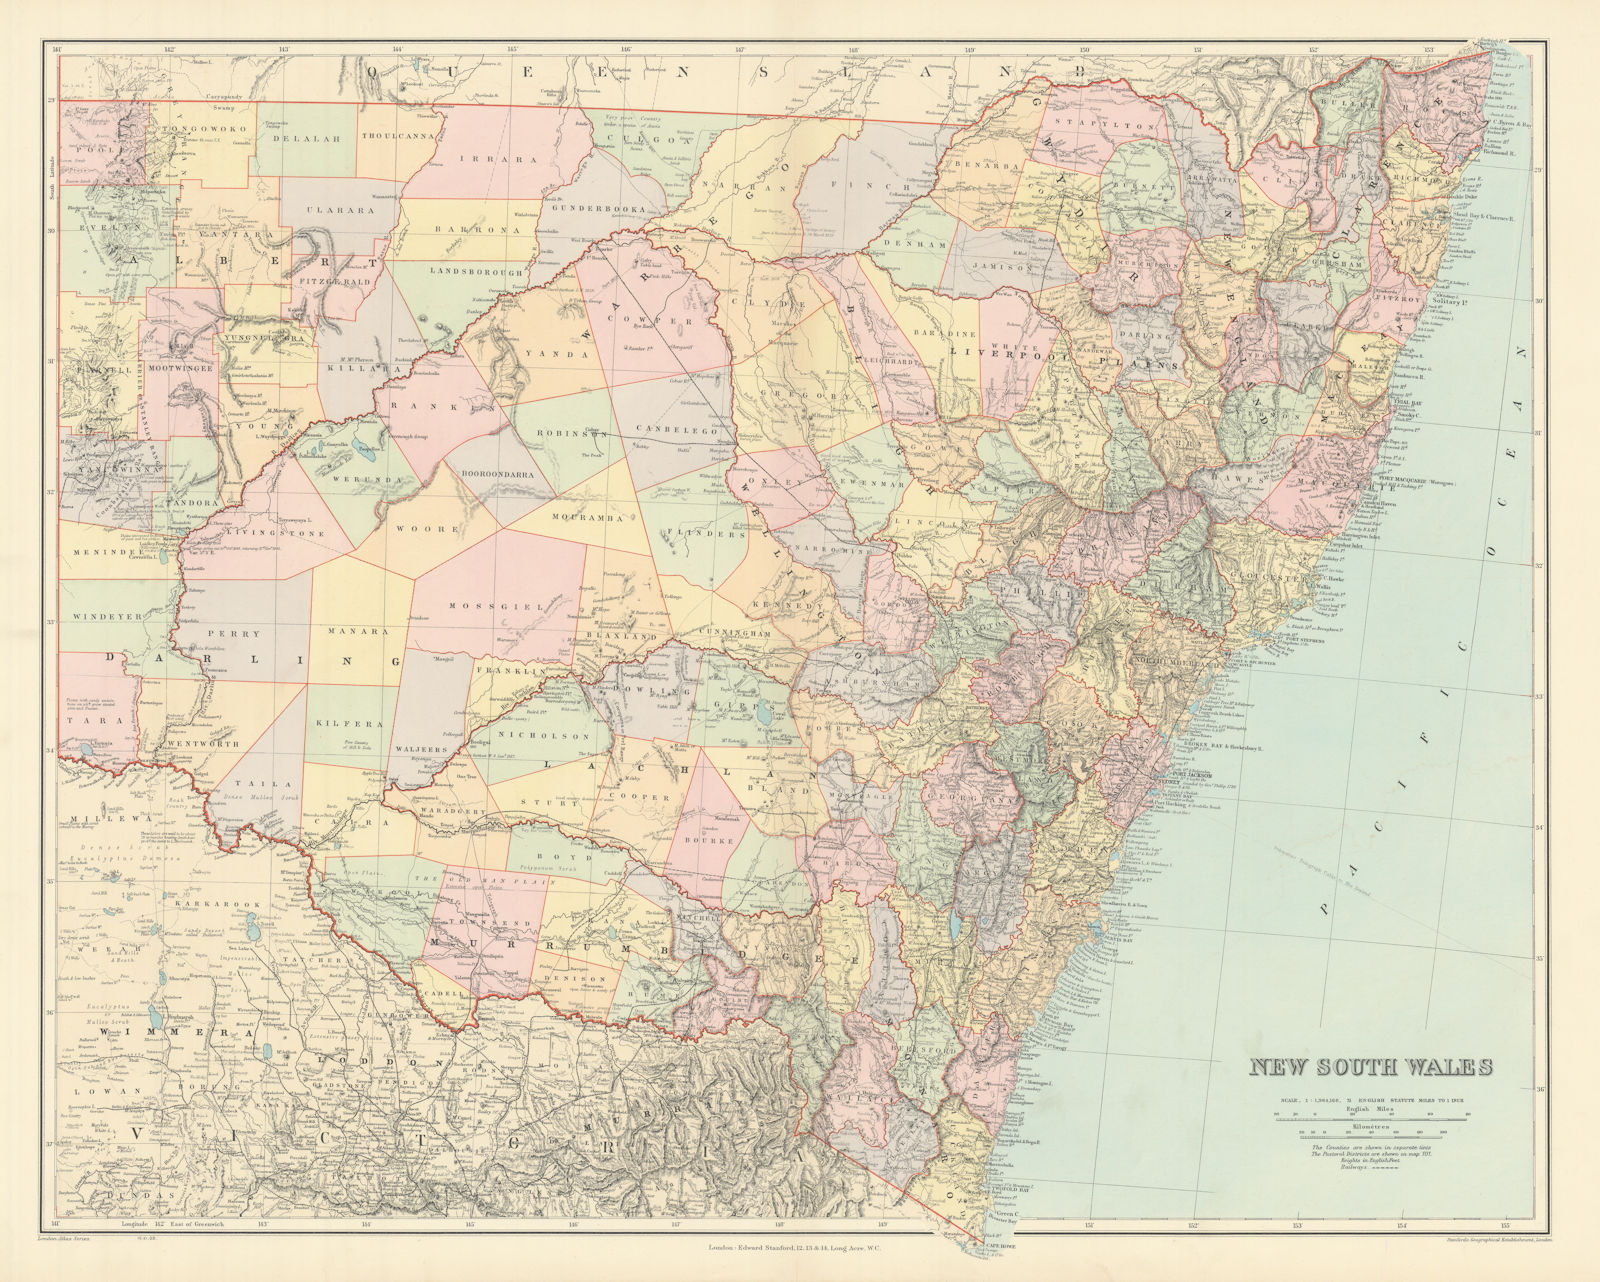 Associate Product New South Wales showing counties & railways. 53x65cm. STANFORD 1904 old map